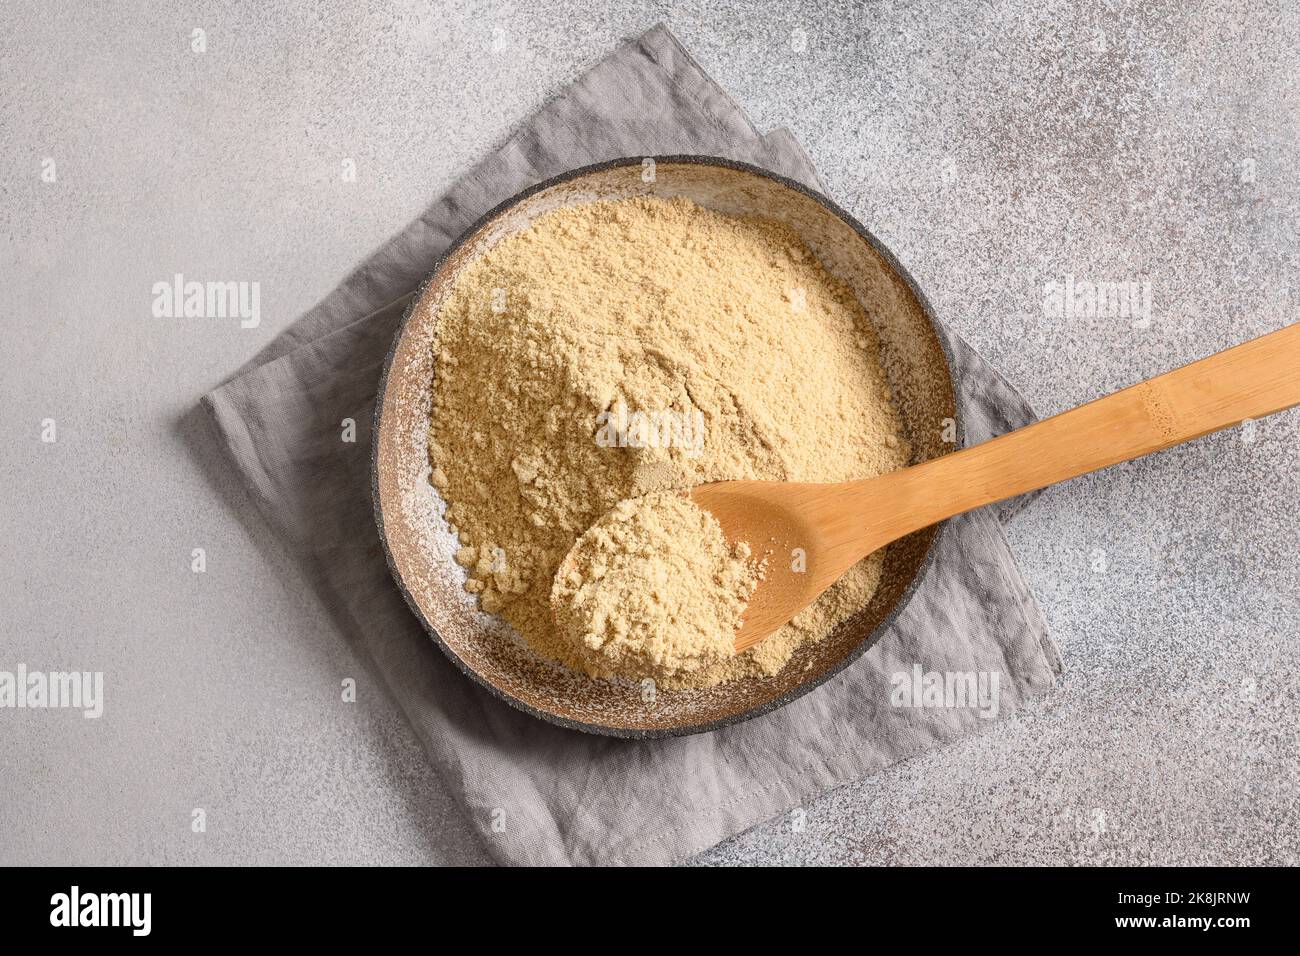 Sesame flour in bowl and white sesame seeds on gray background for cooking low carbohydrate vegan dessert. Top view. Stock Photo